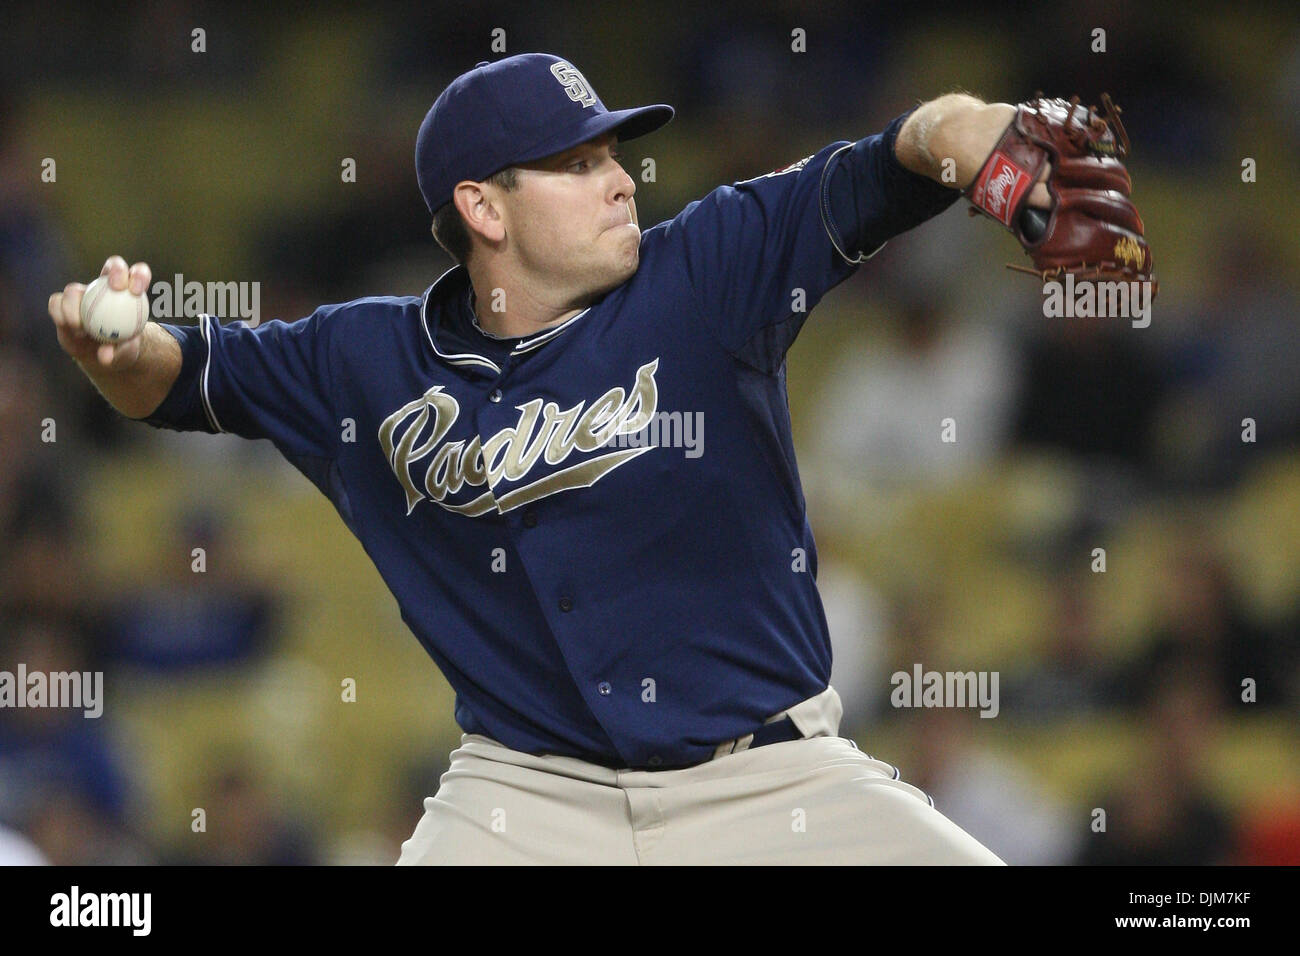 Sept. 22, 2010 - Los Angeles, California, United States of America - San Diego Padres pitcher (#46) TIM STAUFFER pitches during the Padres vs. Dodgers game at Dodgers Stadium. The Padres went on to defeat the Dodgers with a final score of 3-1. (Credit Image: © Brandon Parry/Southcreek Global/ZUMApress.com) Stock Photo